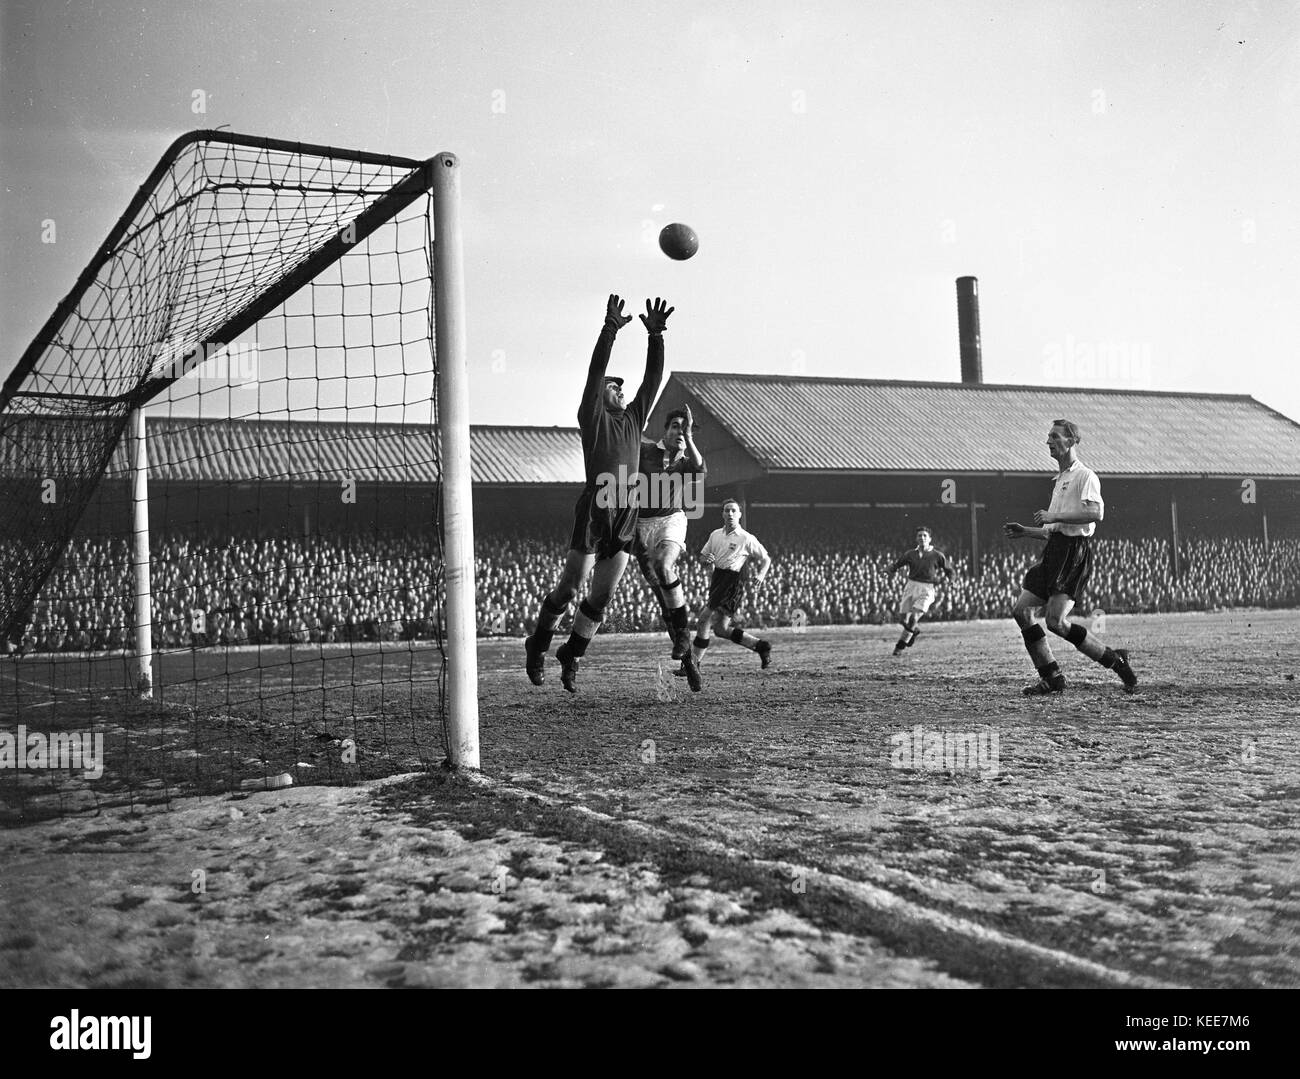 Goalkeeper Ray Middleton makes a save as Geoff Barrowcliff (centre) and Ken Oliver (right) of Derby County (right) look on in a match at Derby County's Baseball Ground.  Photograph by Tony Henshaw From the wholly-owned original negative. Stock Photo